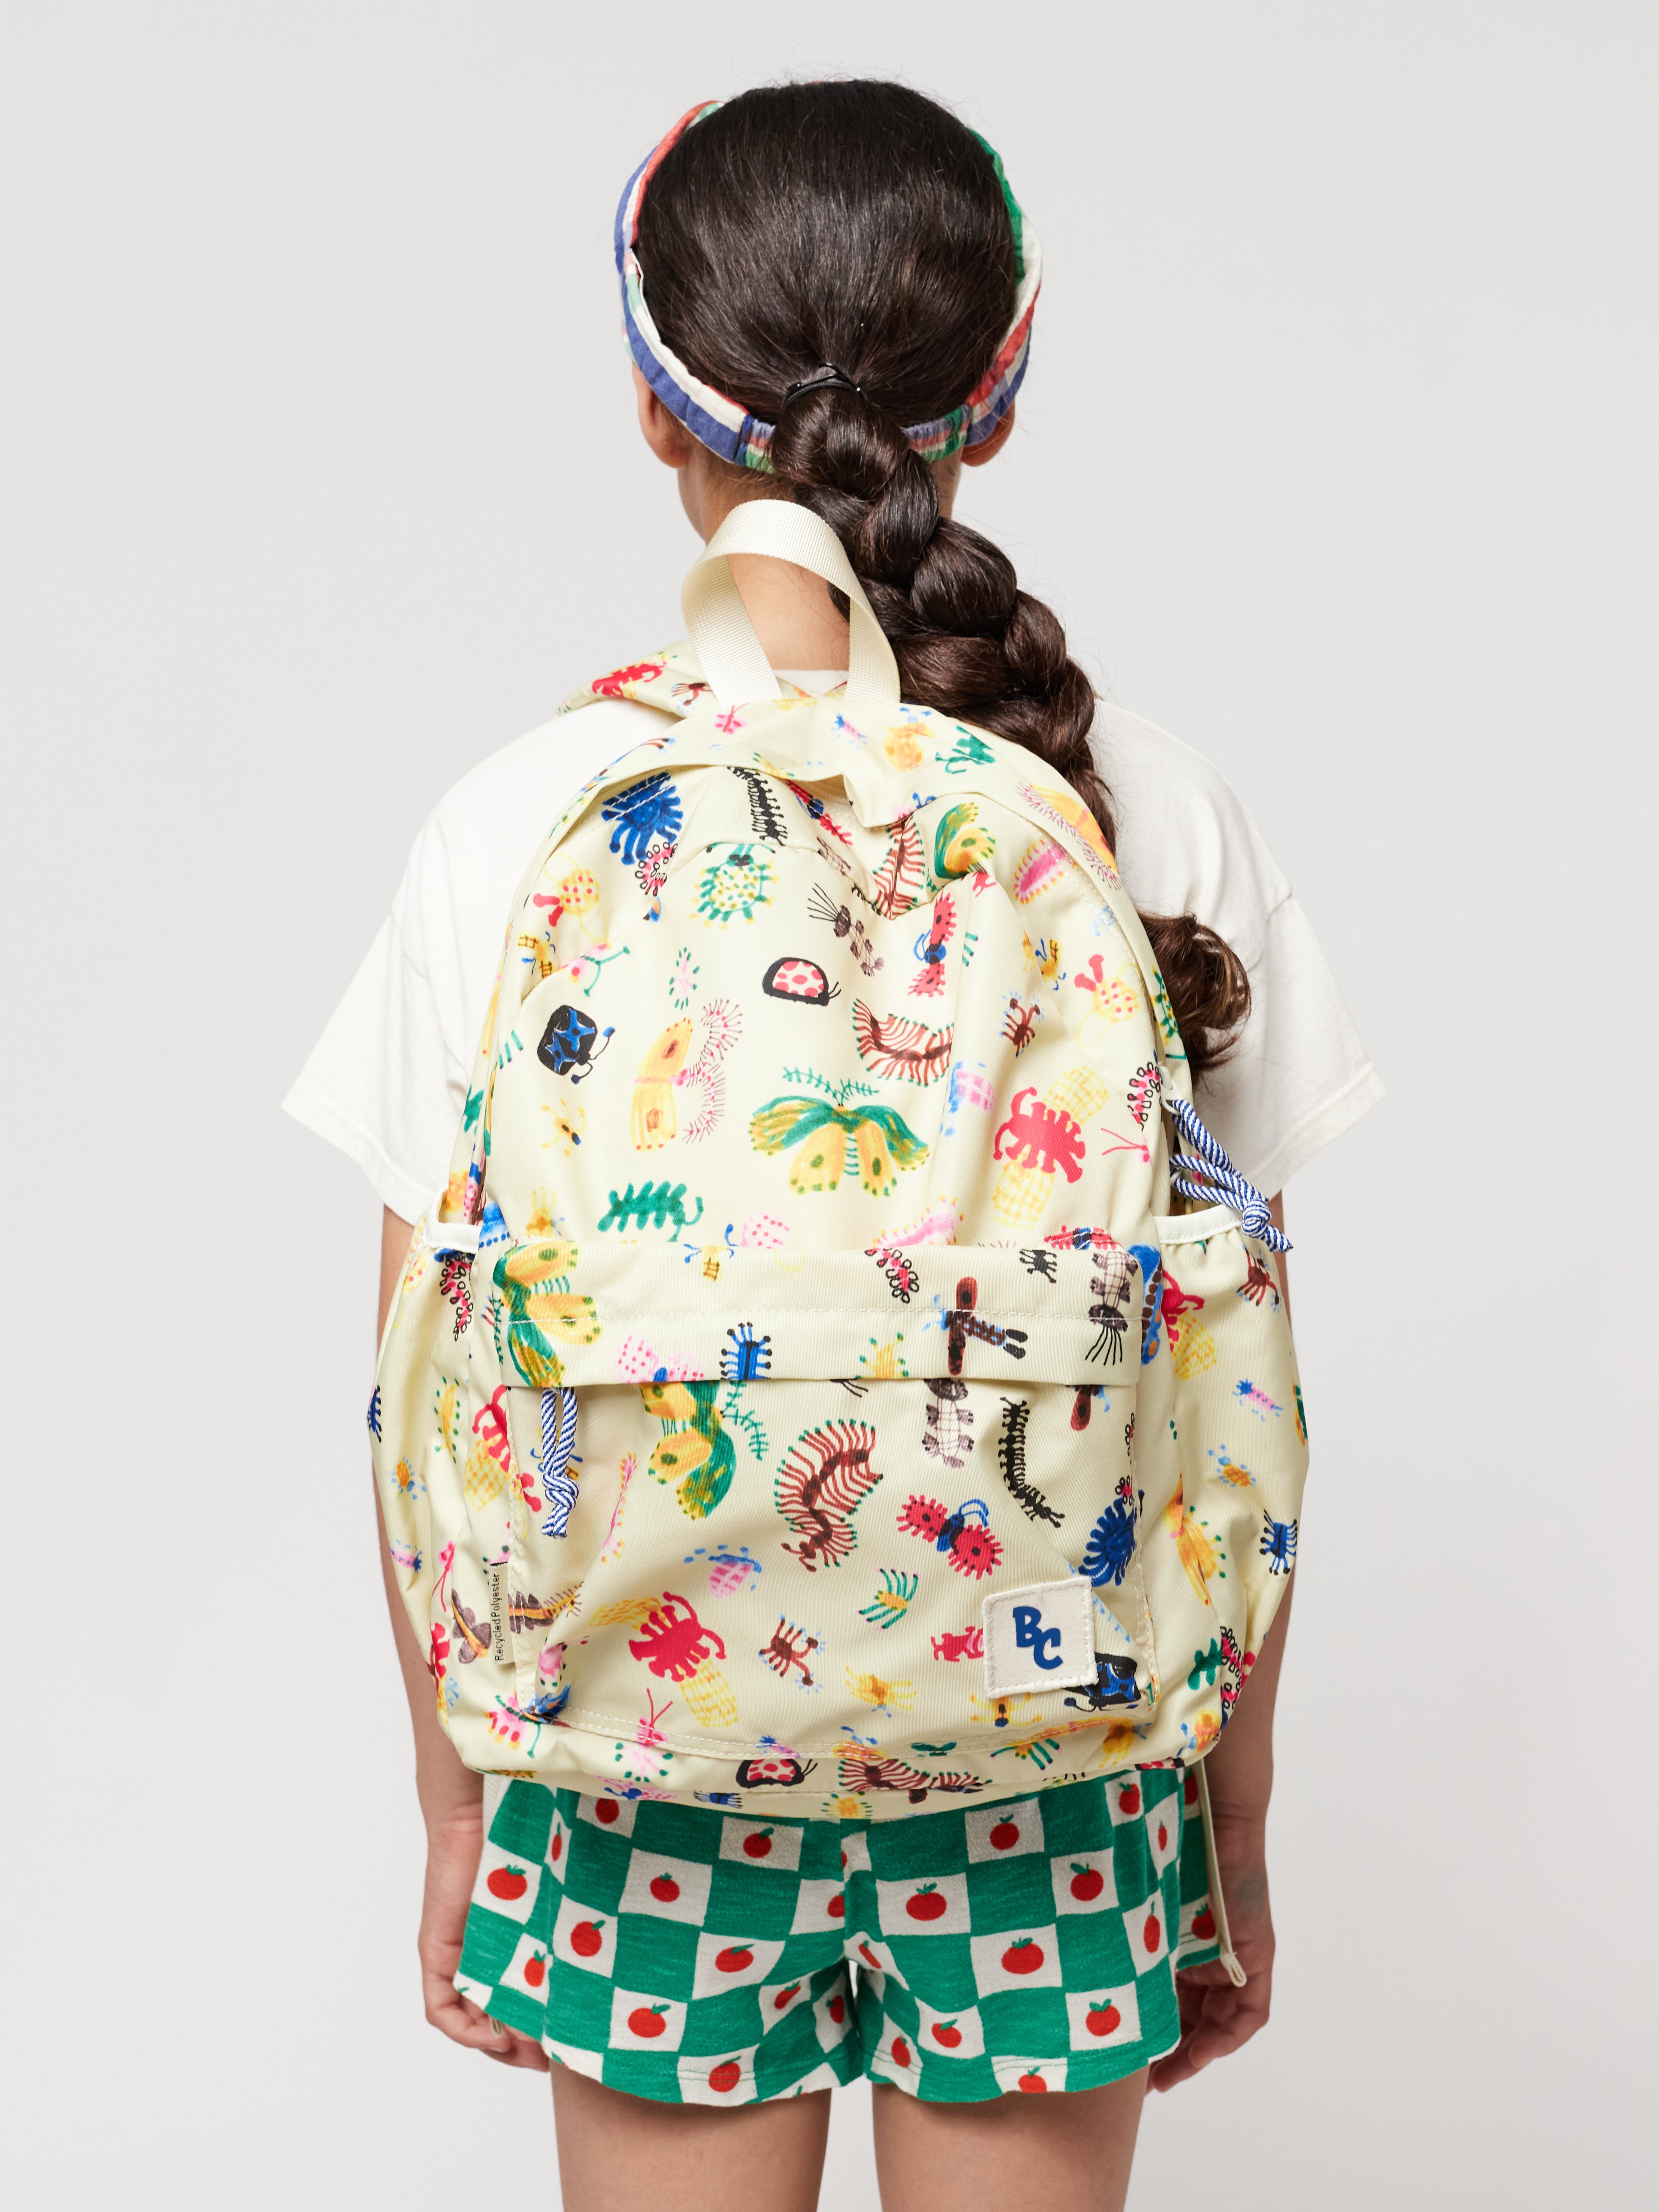 NEW Bobo Choses | Funny Insects All Over backpack